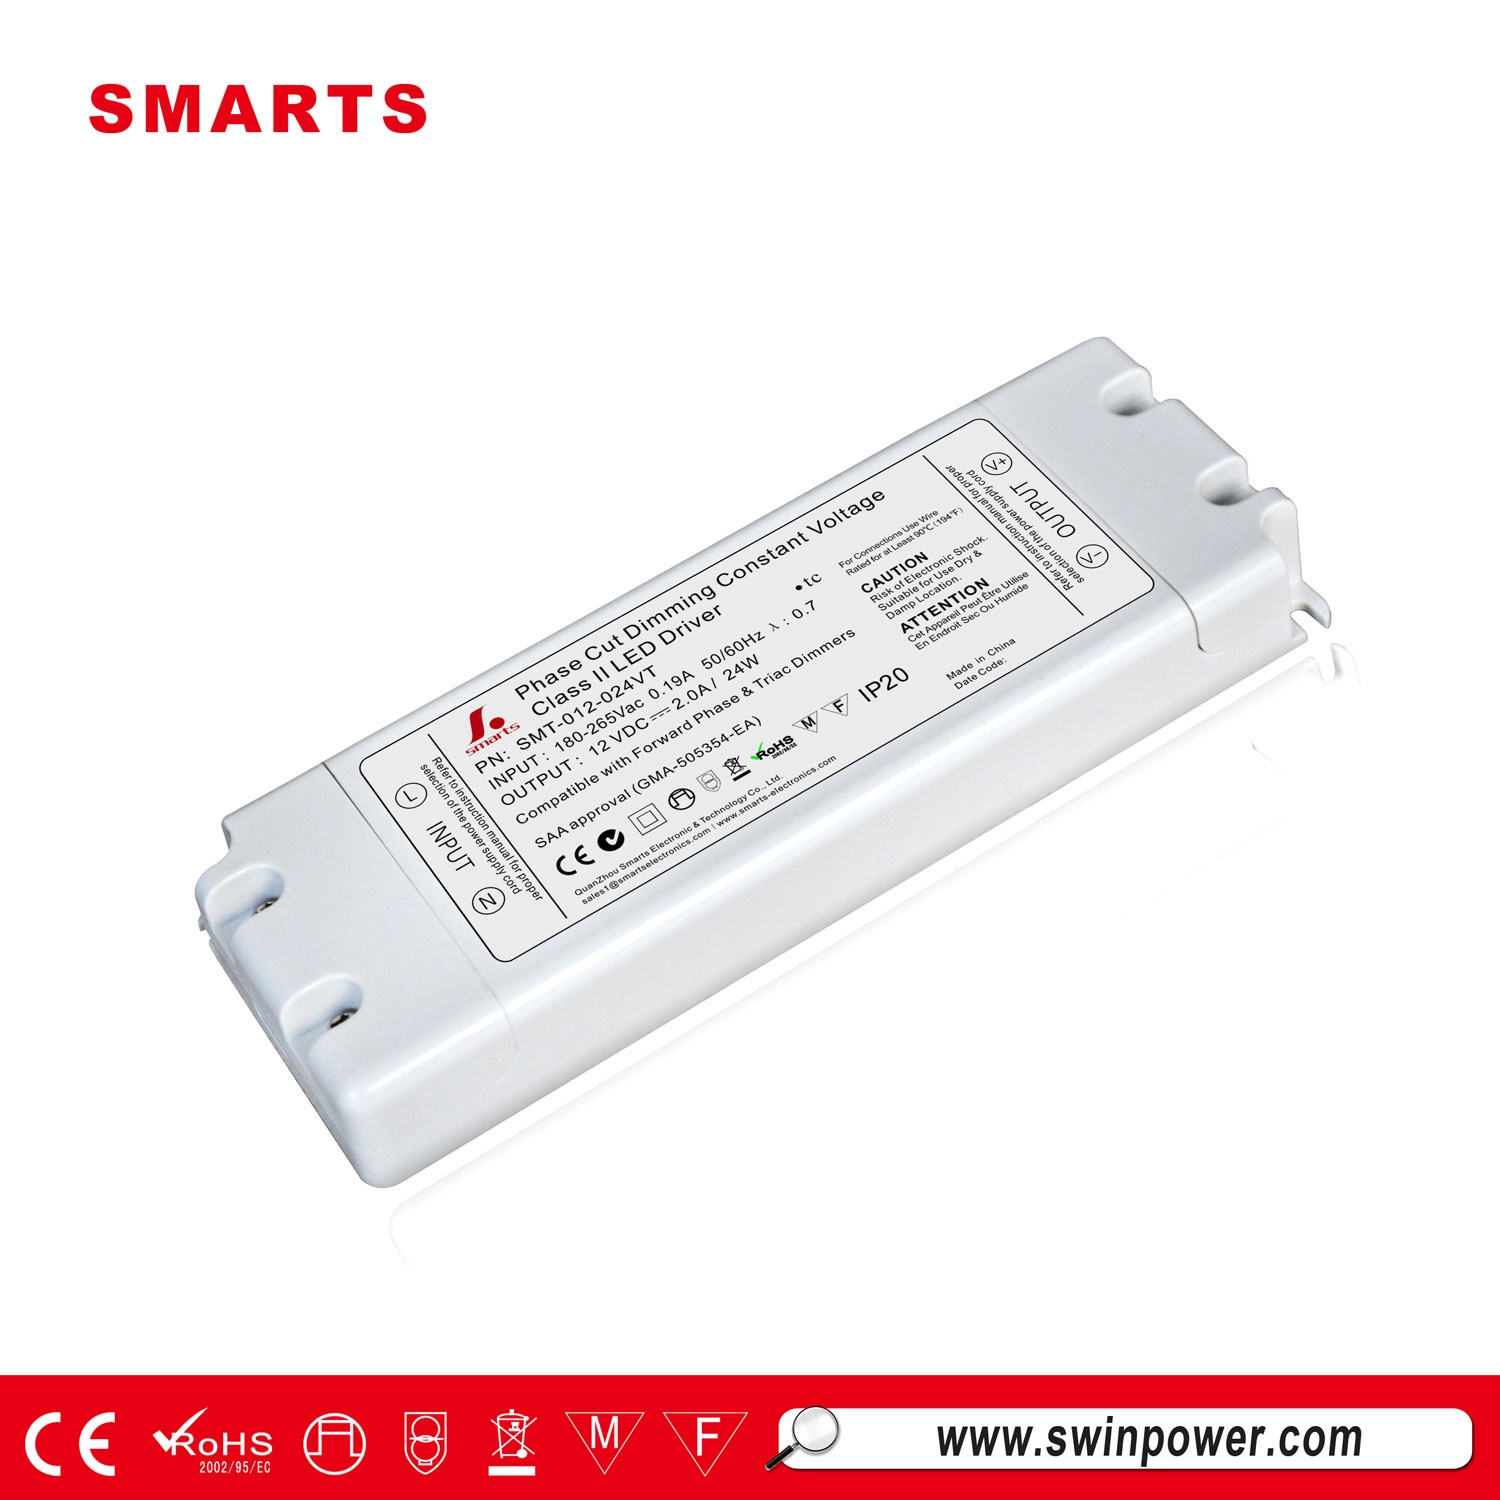 12v 24w constant voltage triac dimmable led power supply